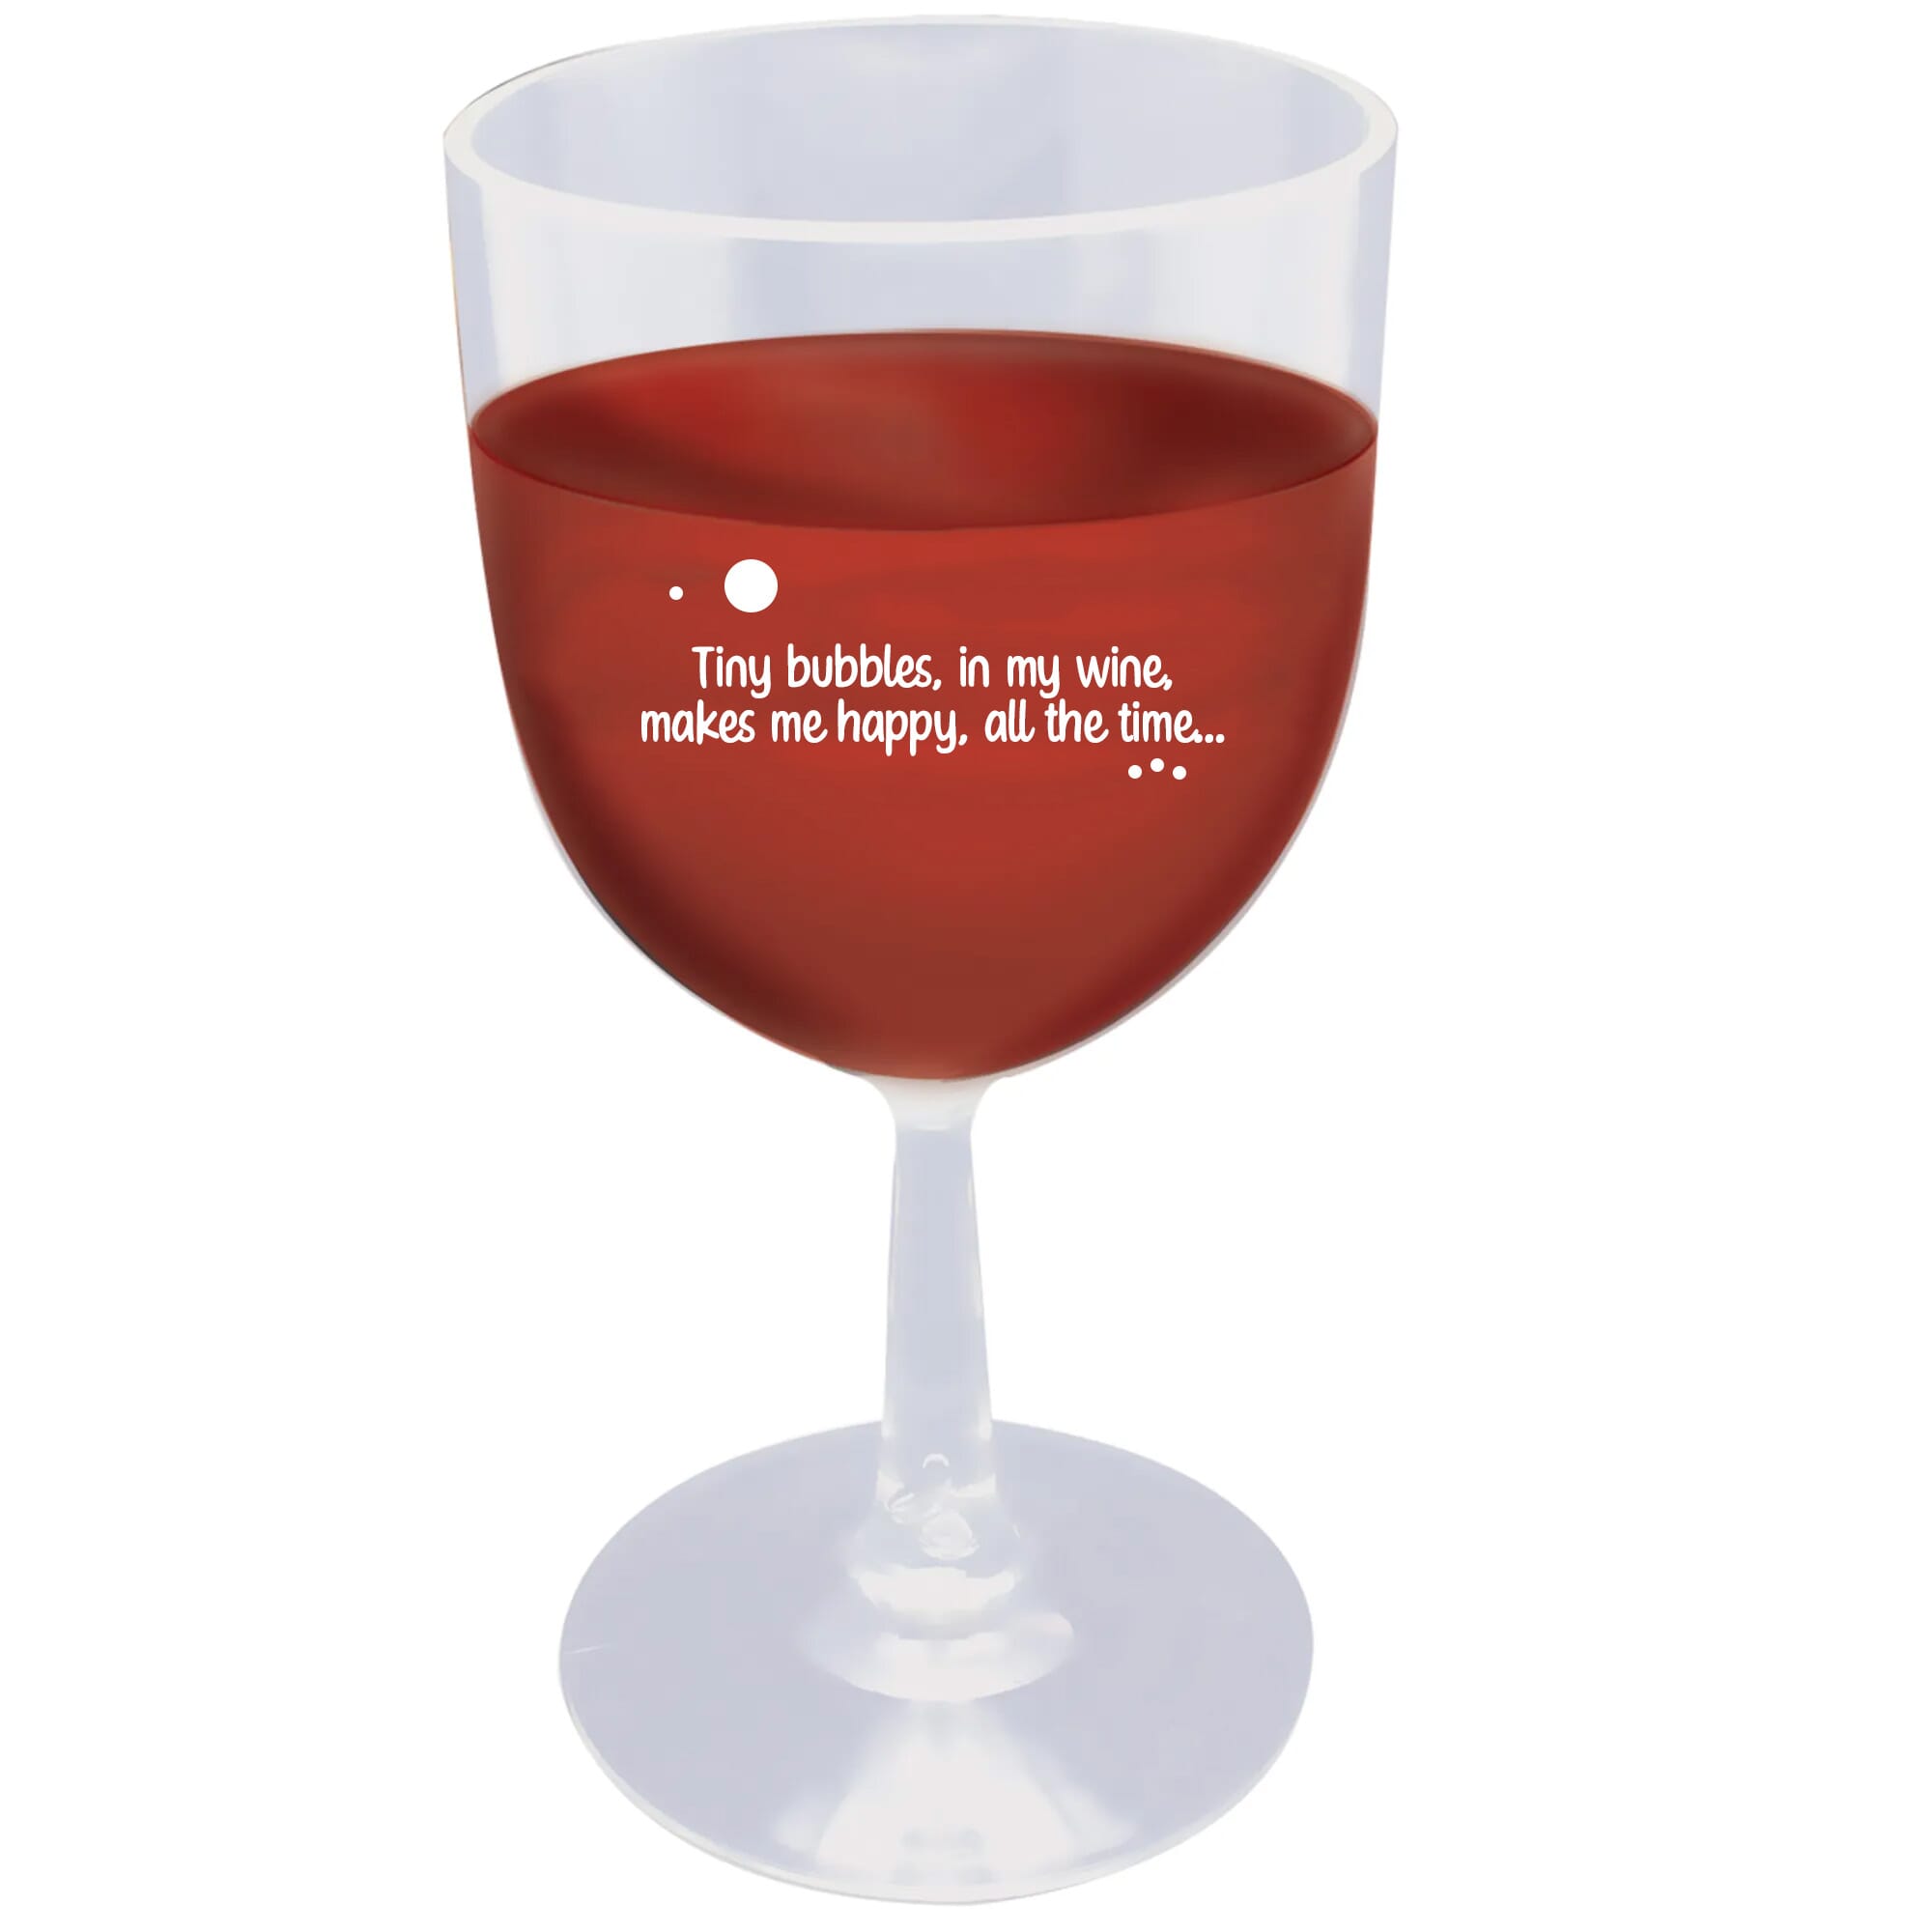 Stemless wine cup with wine quote